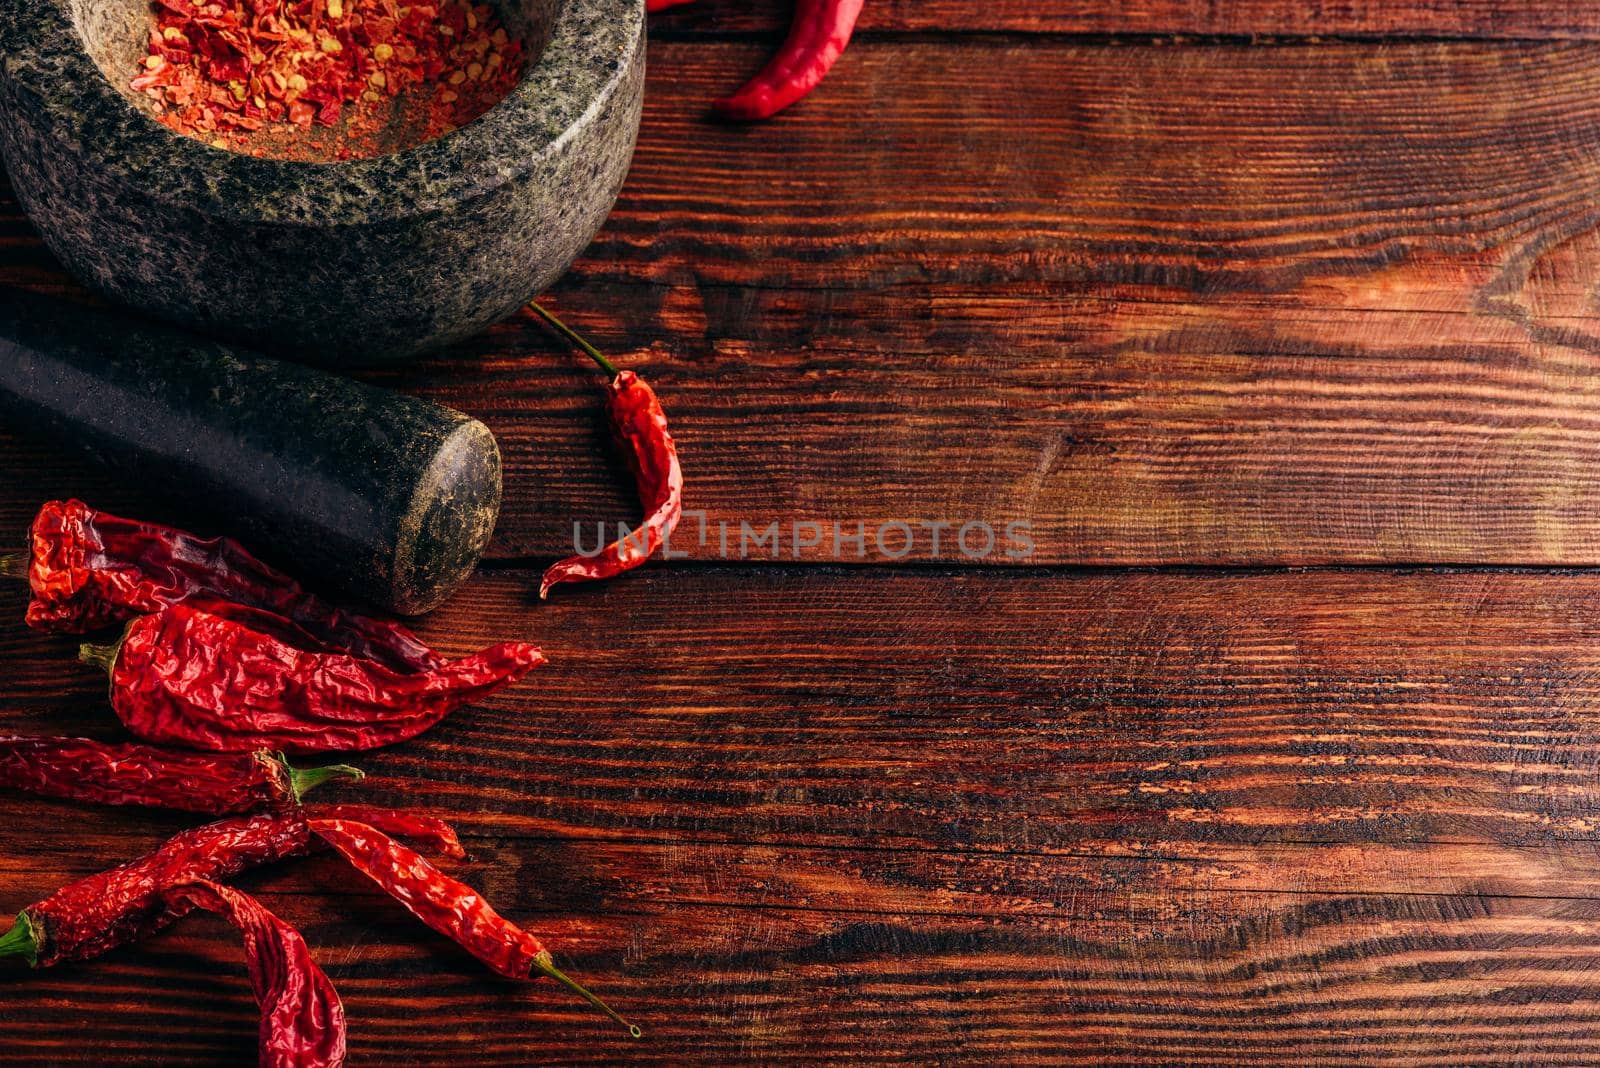 Dried and crushed red chili pepper by Seva_blsv